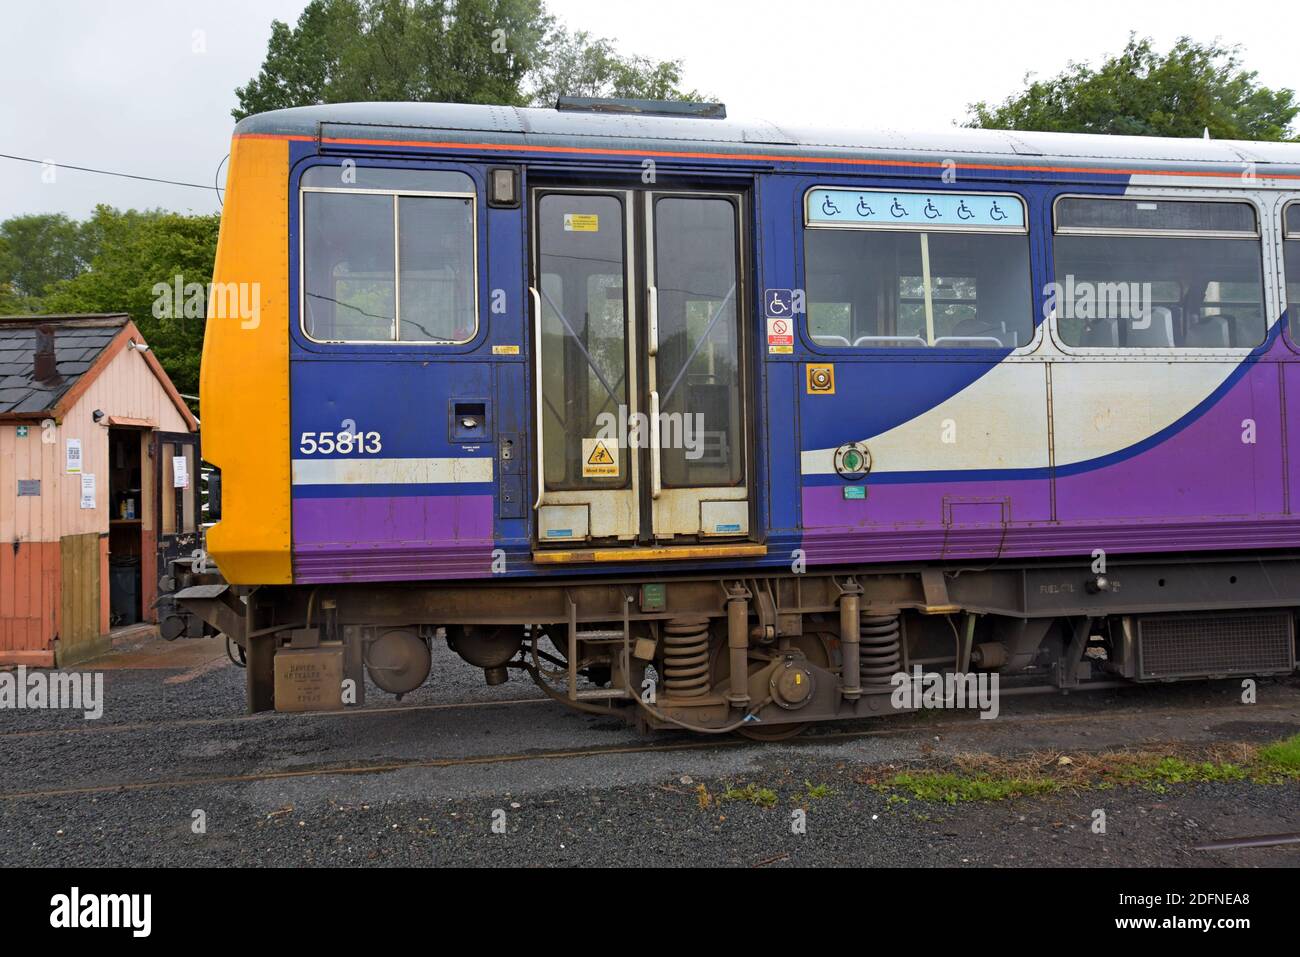 A Class 144 Pacer Train newly withdrawn from service, now bought and preserved by the Telford Steam Heritage Railway Stock Photo